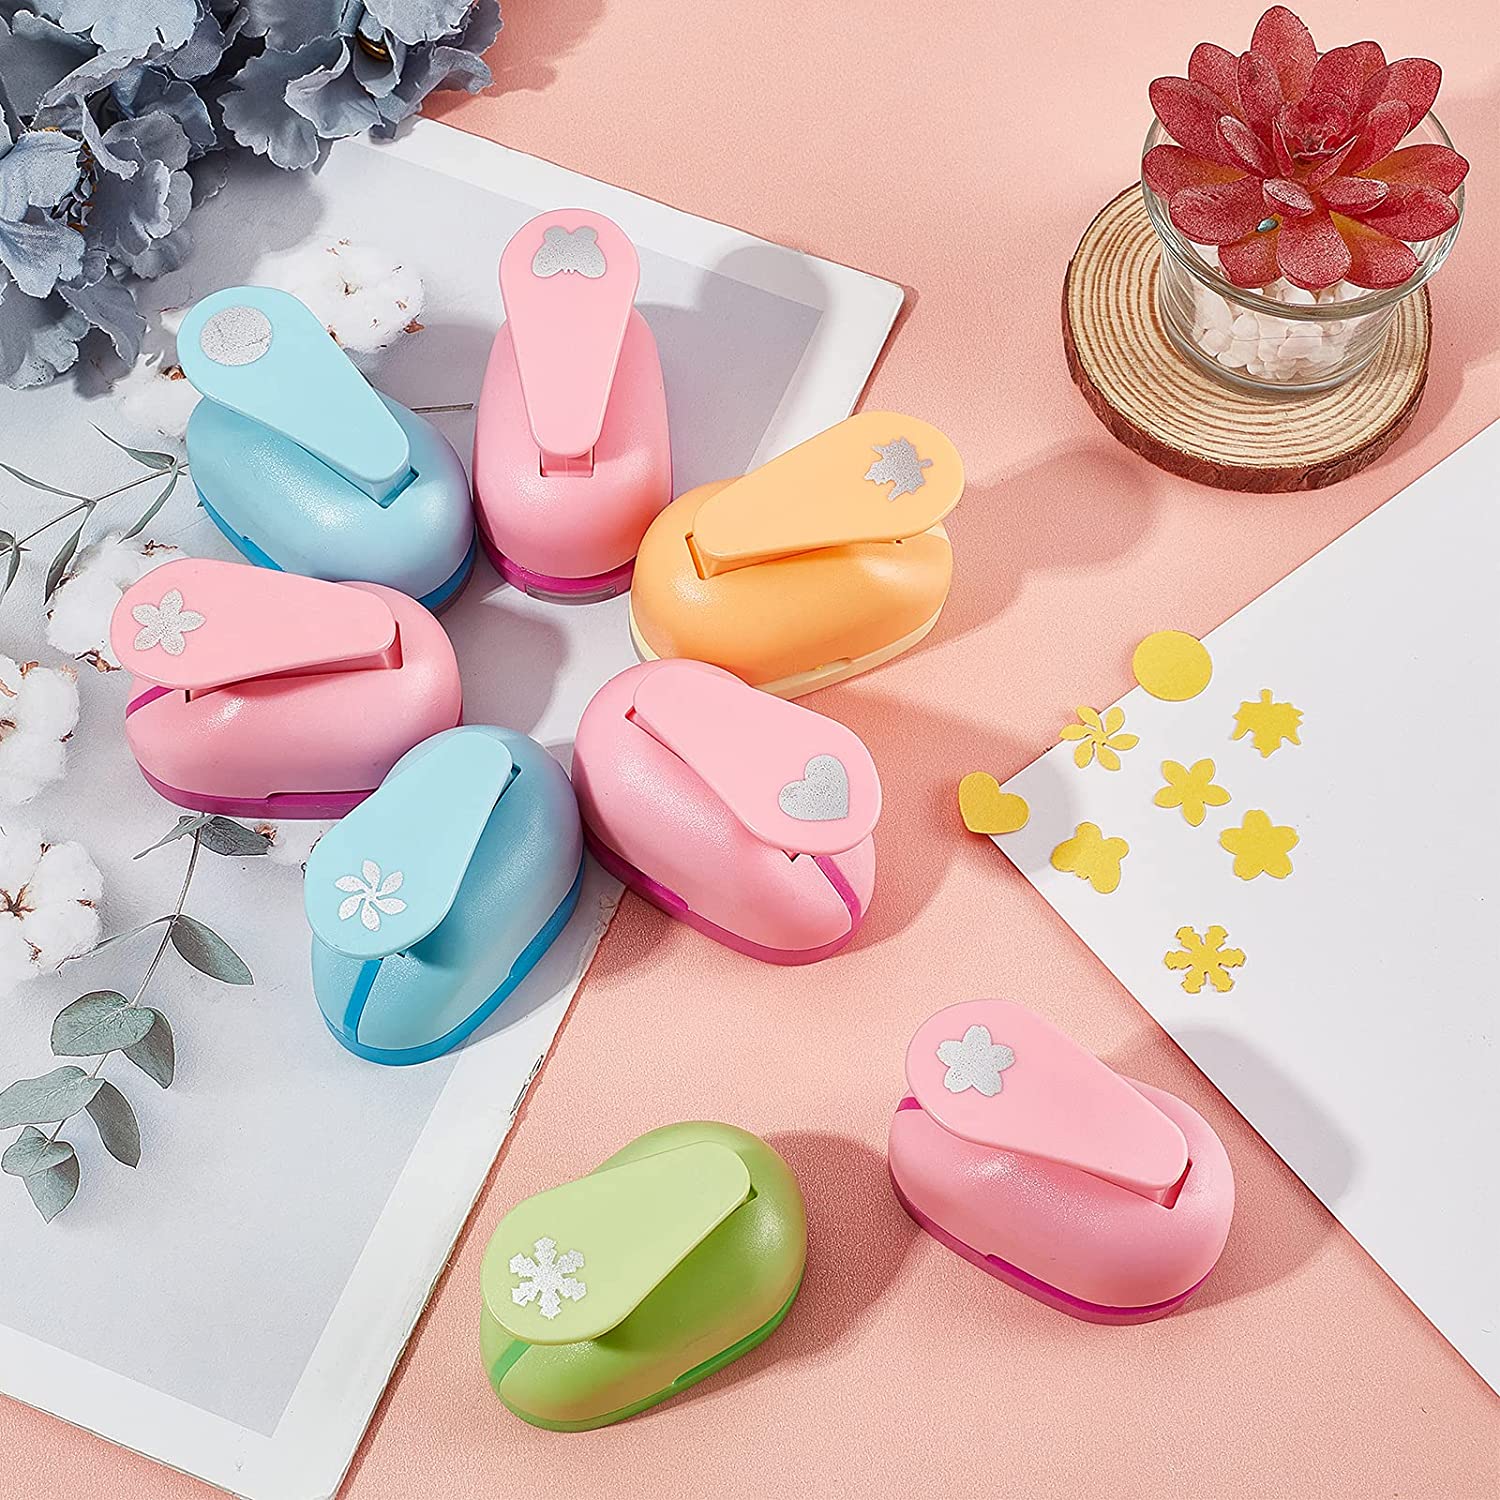 Paper Hole Punch Craft Tools Card Cutter Scrapbooking Stationery Mini Hole  Punch For Office - Buy Paper Hole Punch Craft Tools Card Cutter  Scrapbooking Stationery Mini Hole Punch For Office Product on